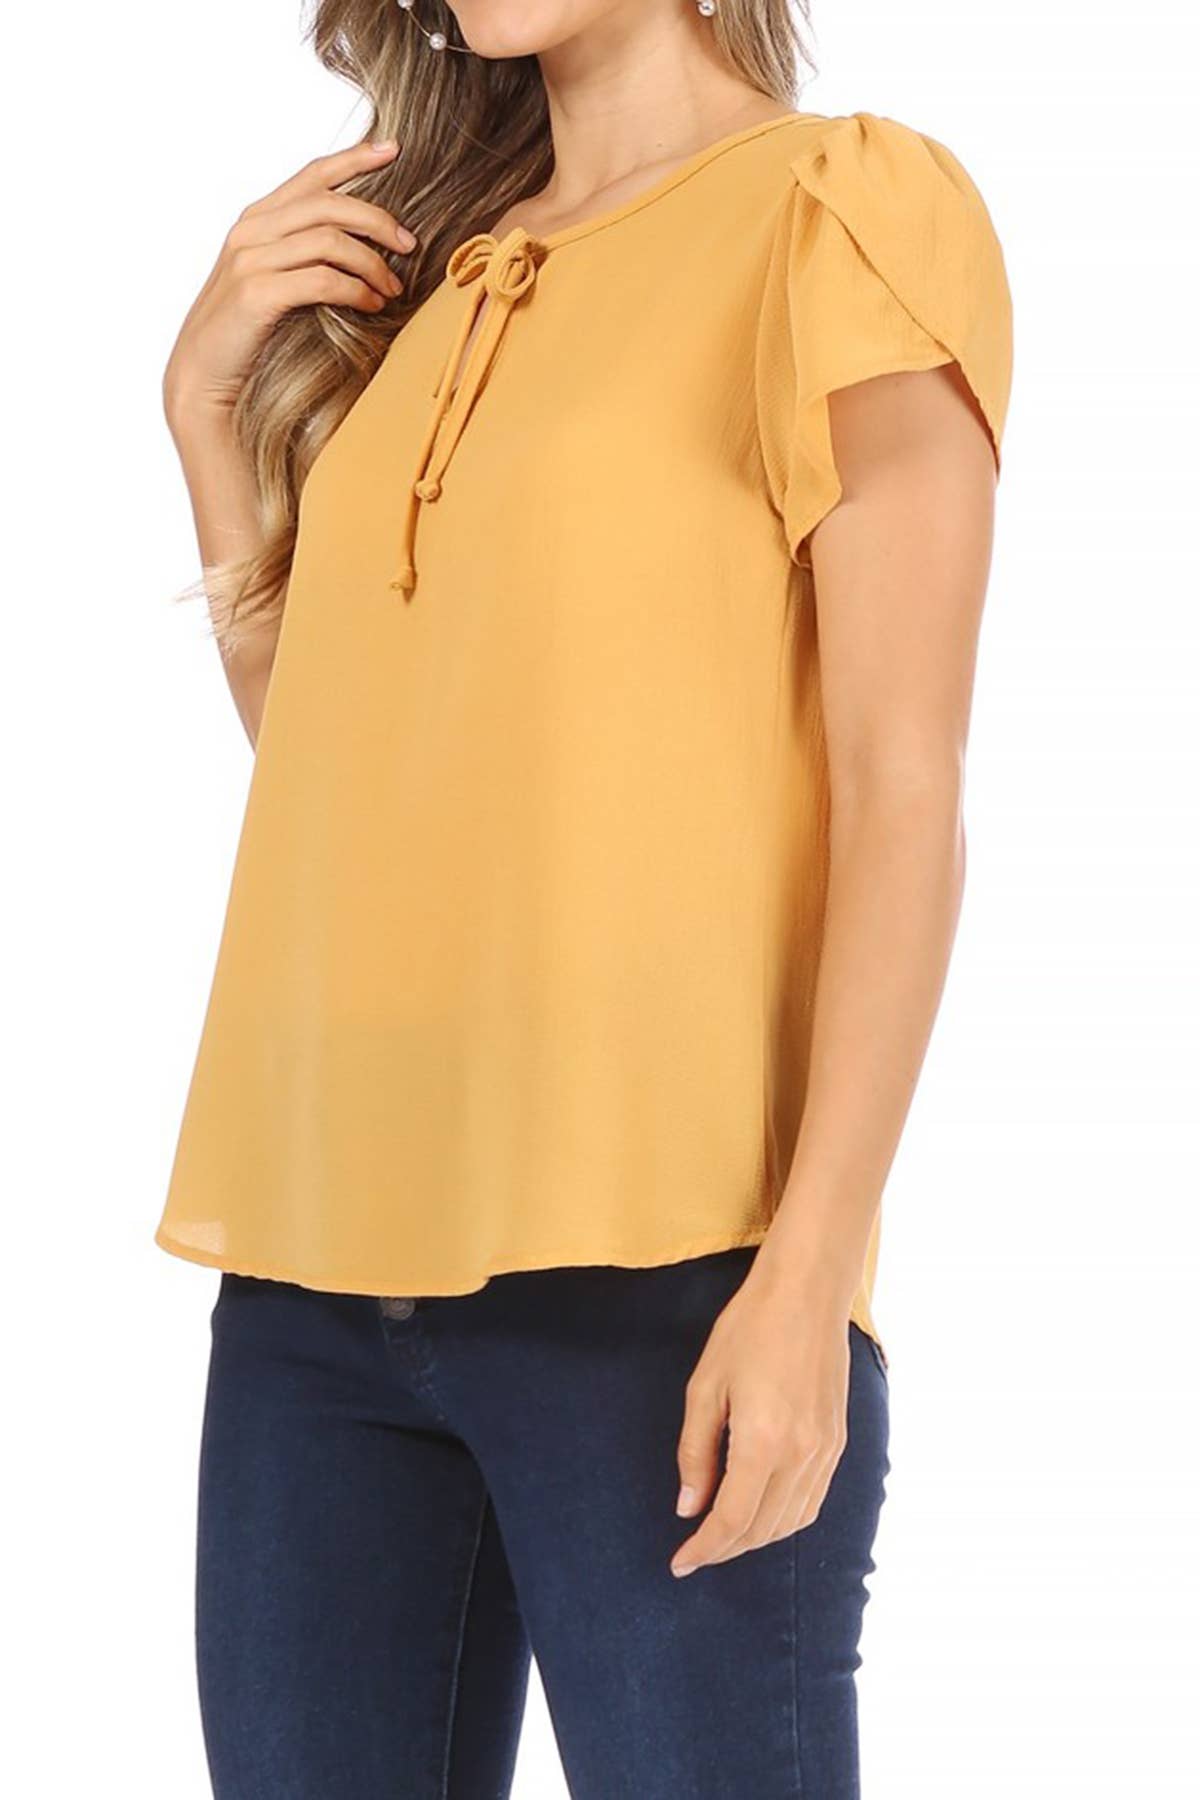 Women's Casual Solid Sleeve Tie Round Neck Blouse Top: Small / Green